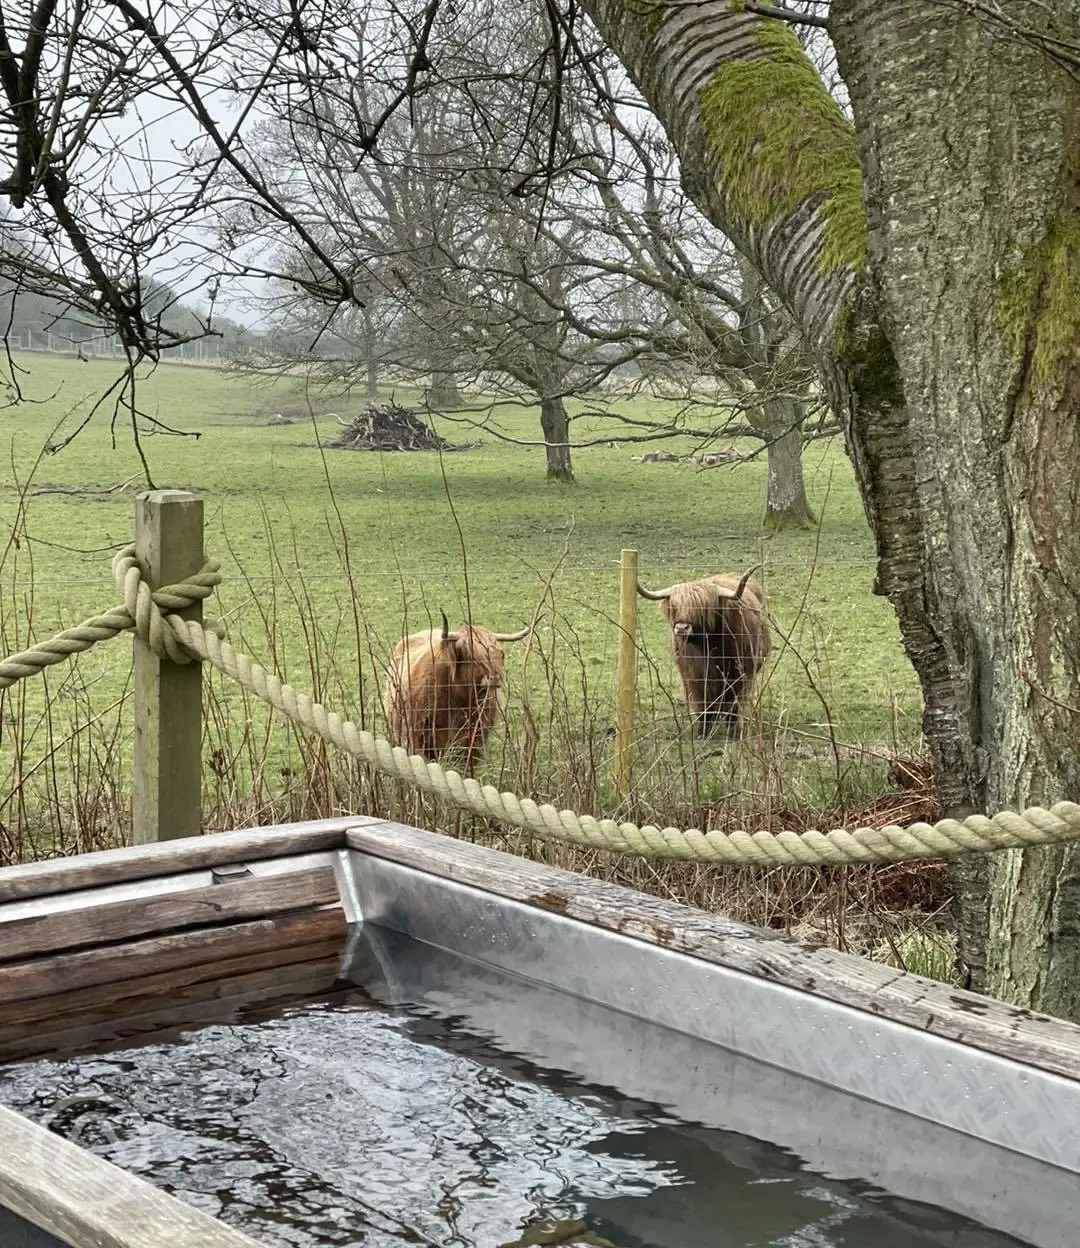 View of Highland cattle from the outdoor bath